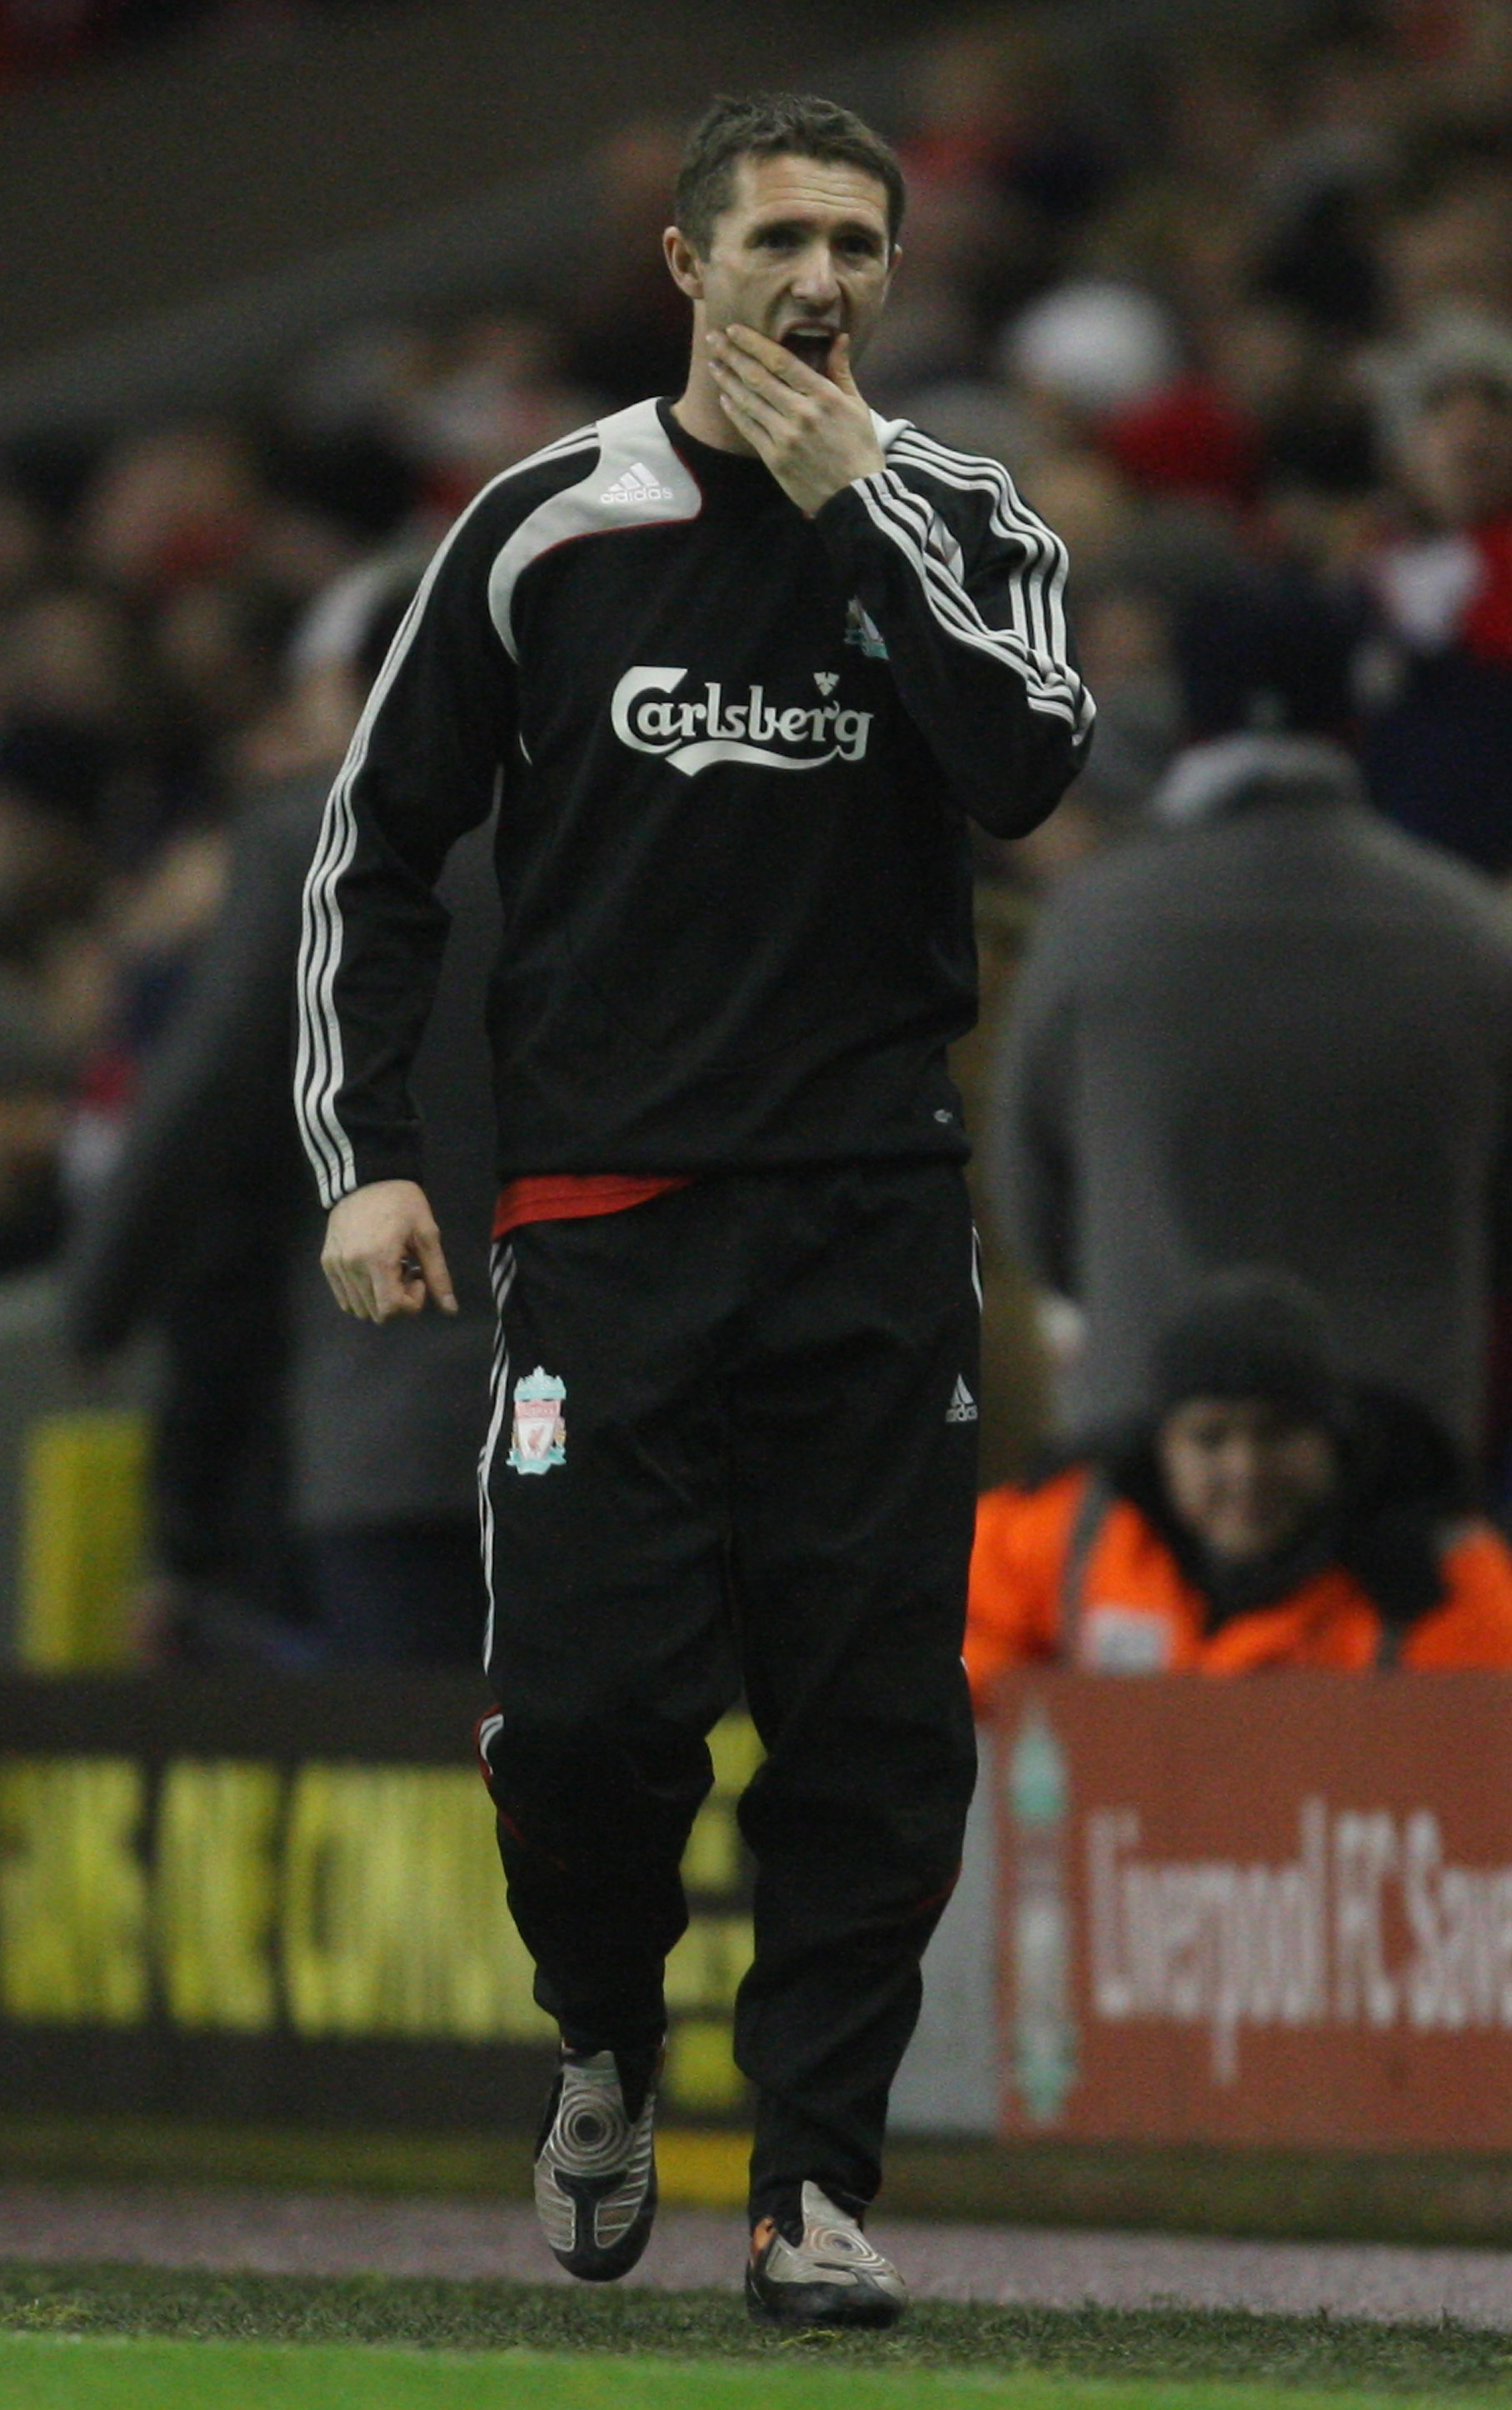 LIVERPOOL, UNITED KINGDOM - DECEMBER 13:  Robbie Keane of Liverpool warms up on the touchline during the Barclays Premier League match between Liverpool and Hull City at Anfield on December 13, 2008 in Liverpool, England.  (Photo by Hamish Blair/Getty Ima